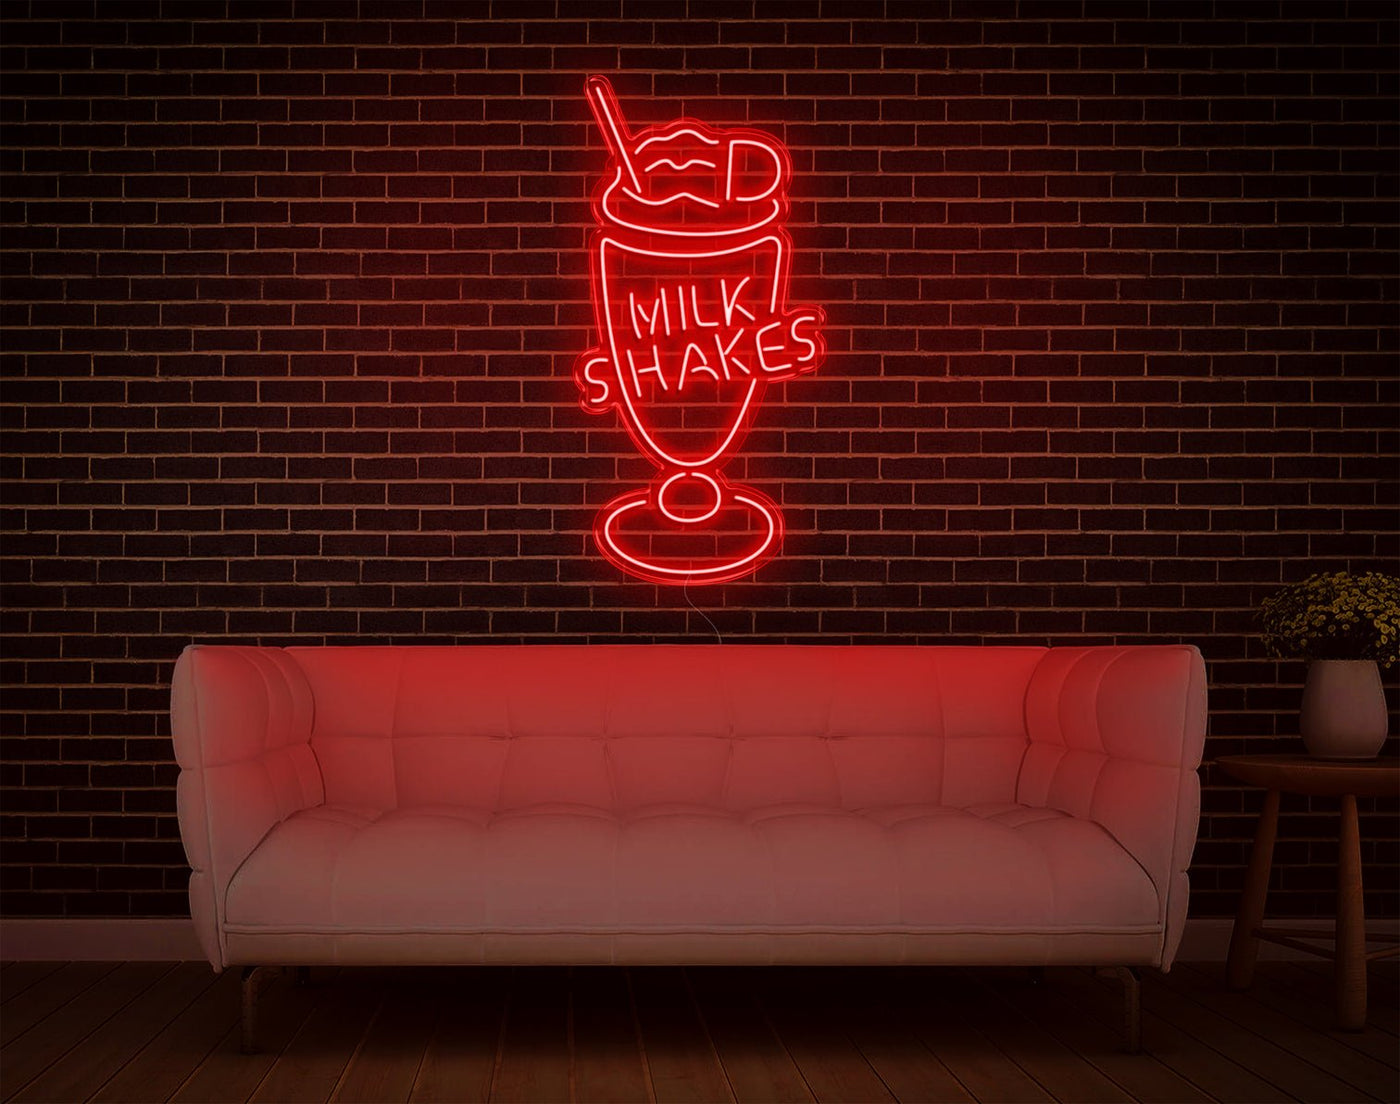 Milk Shakes LED Neon Sign - 37inch x 19inchRed